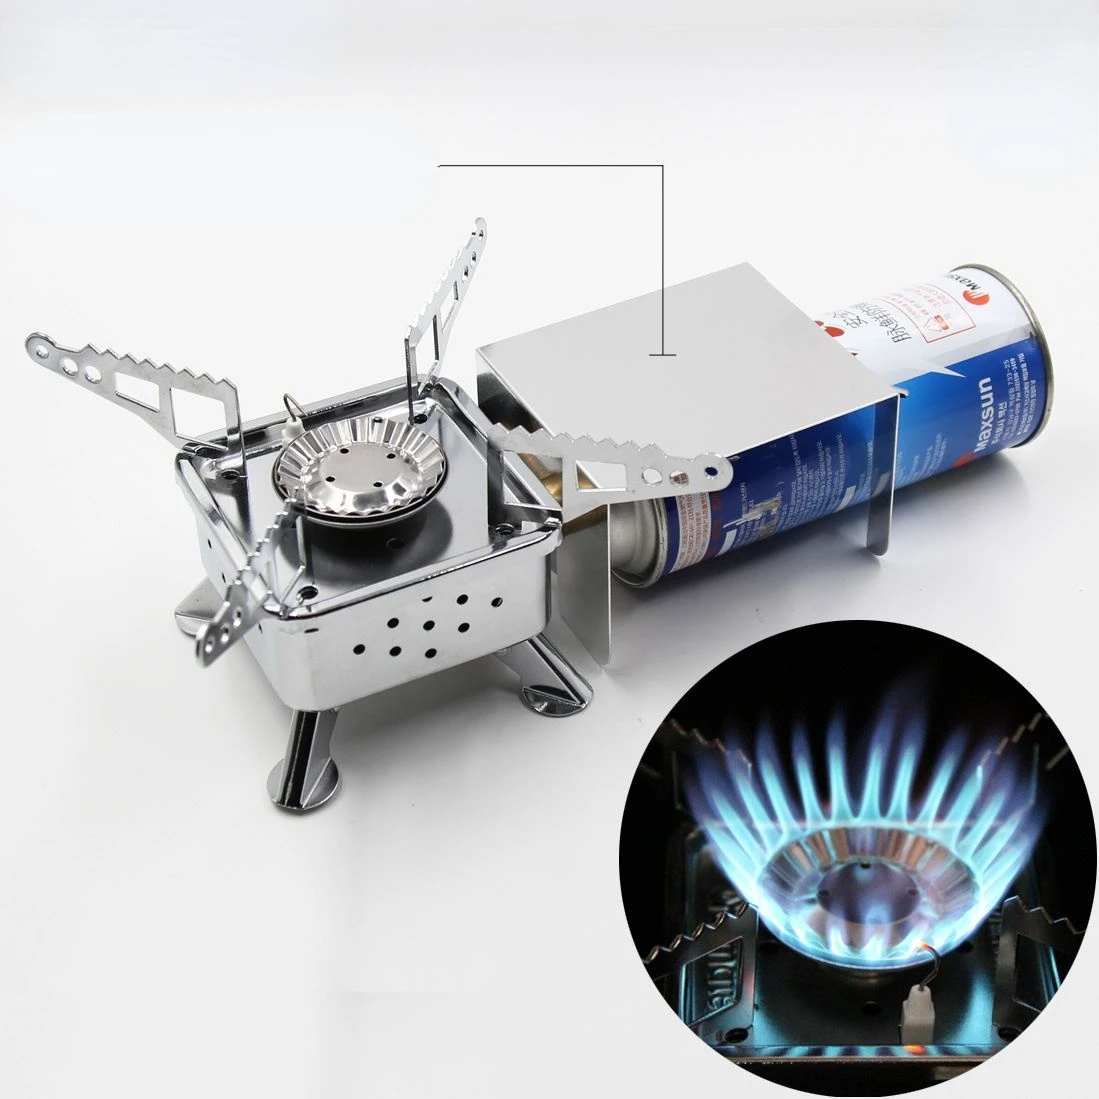 

Outdoor Cassette Stove Small Mini Foldable Portable Camping Meal Heat Shield Gas Stove Outing Gear Survival In The Wild 2022 New